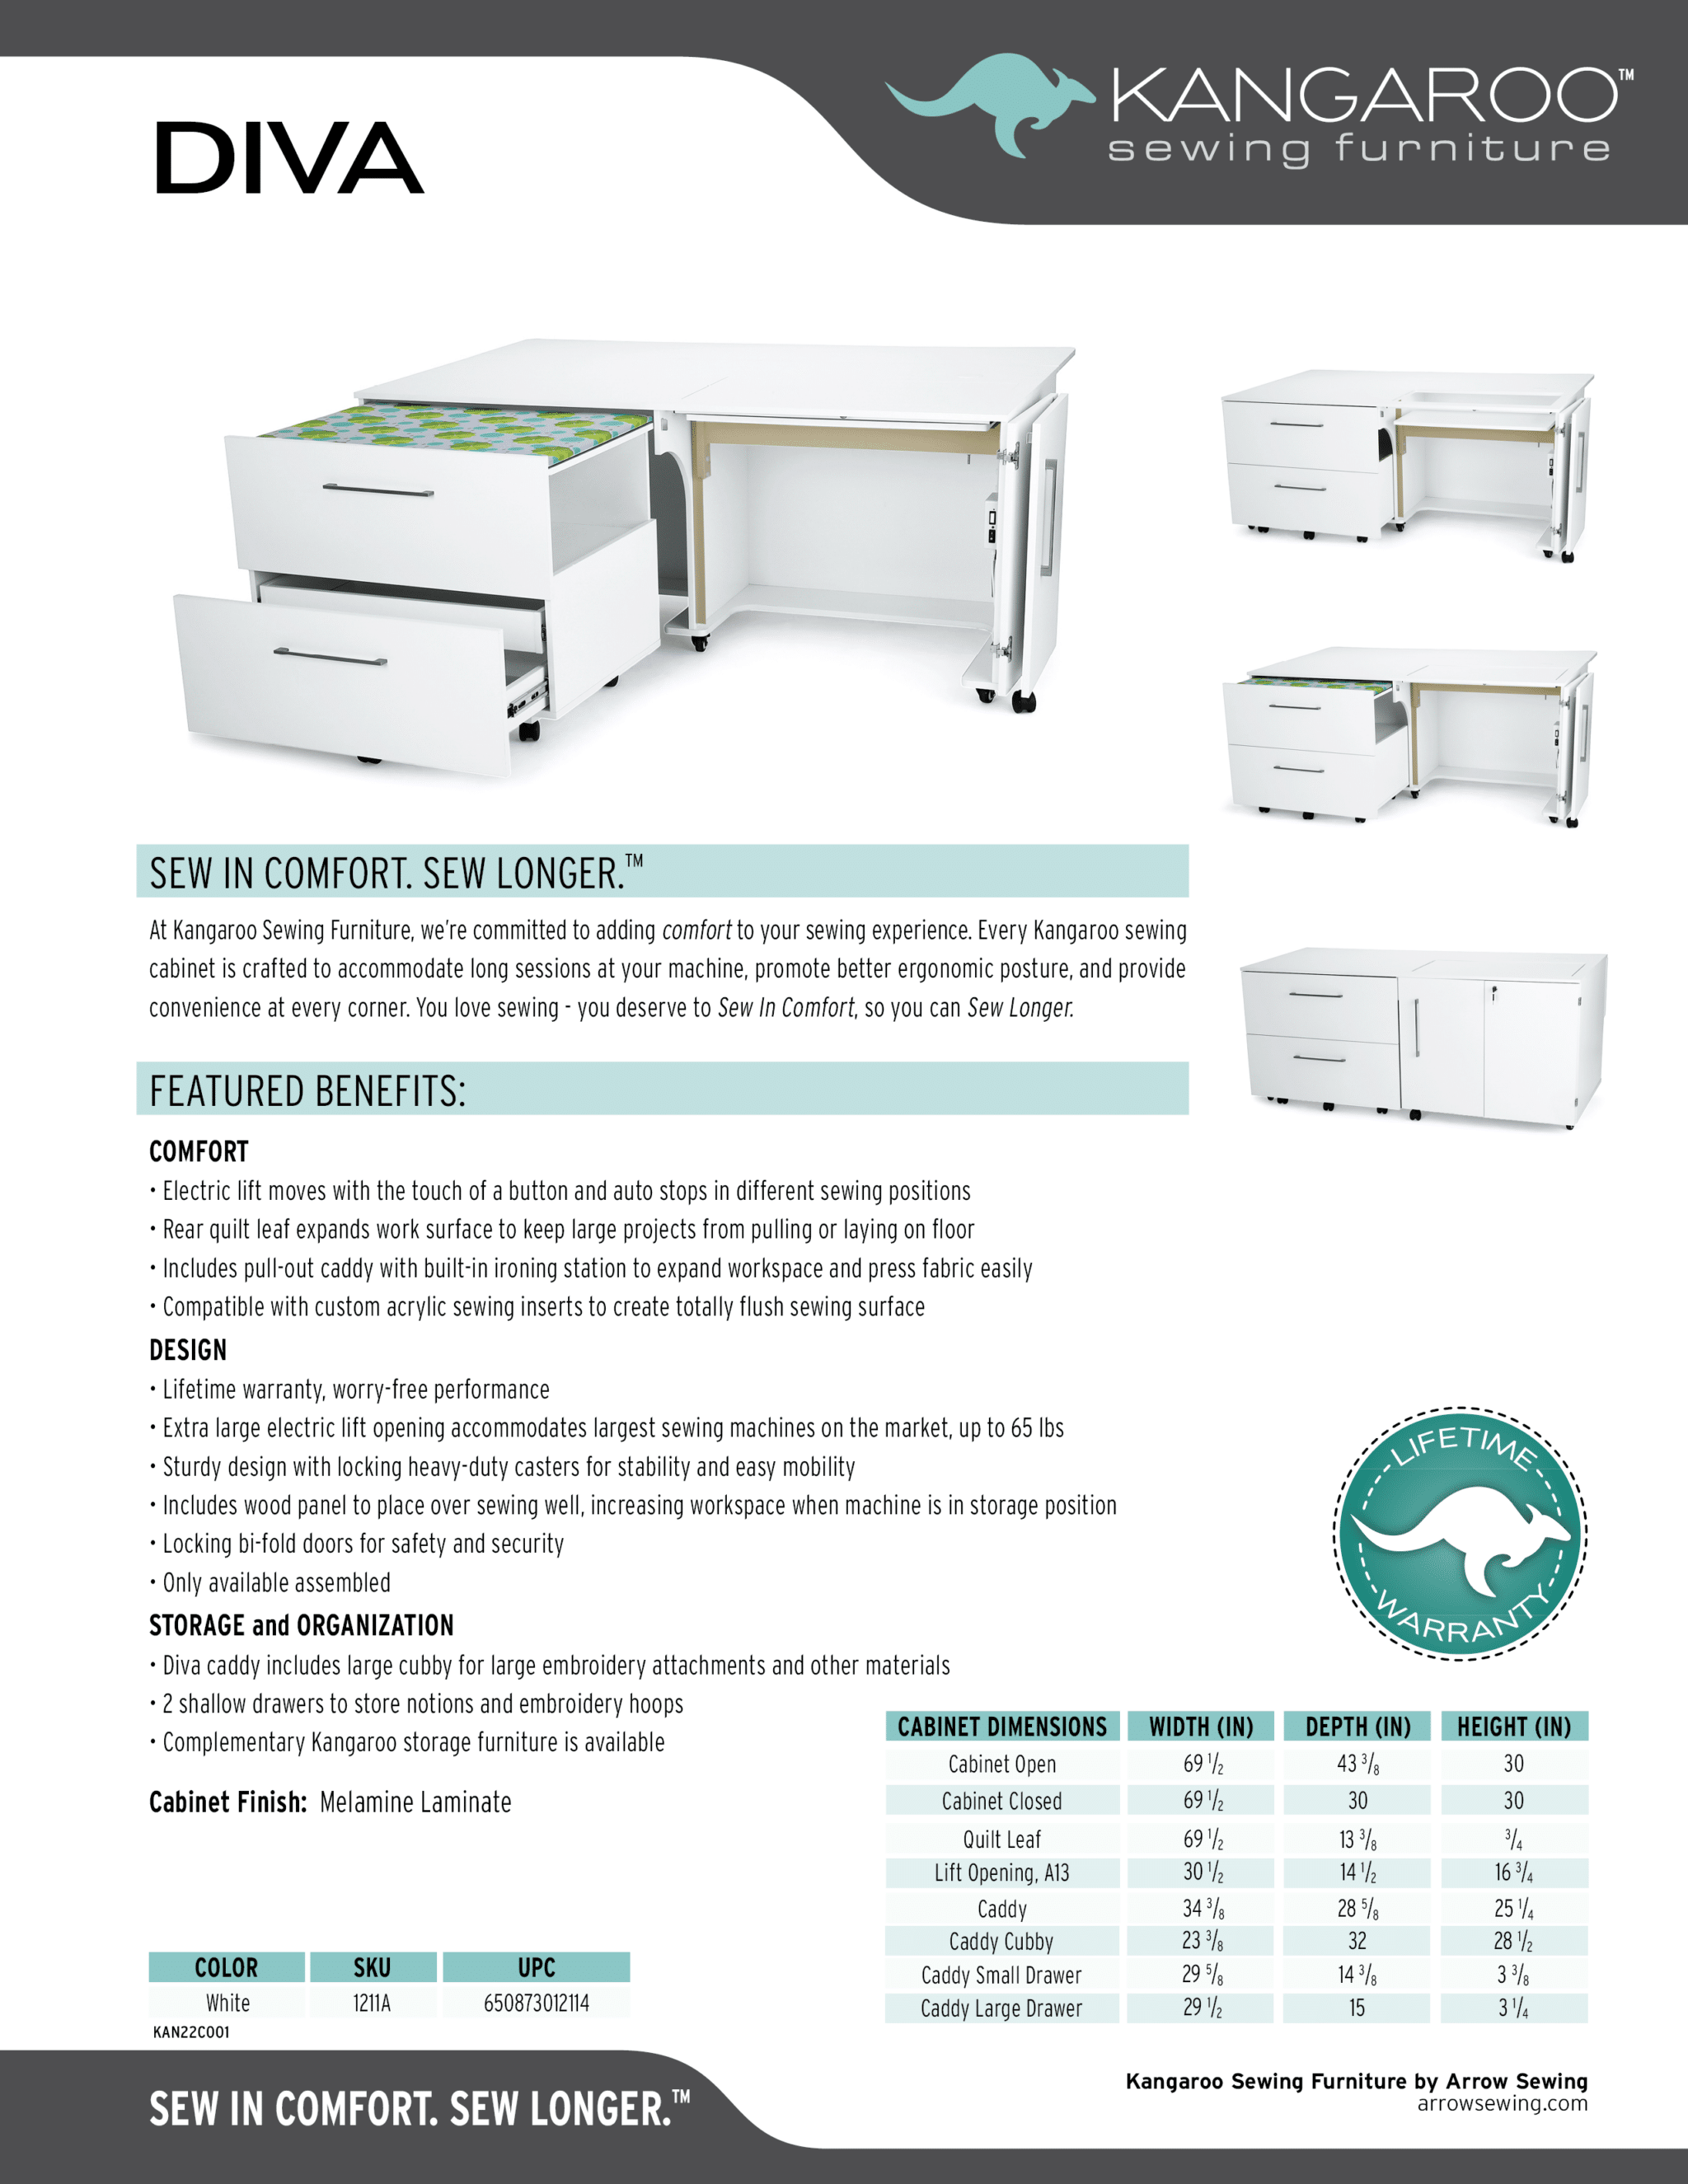 Diva sewing cabinet